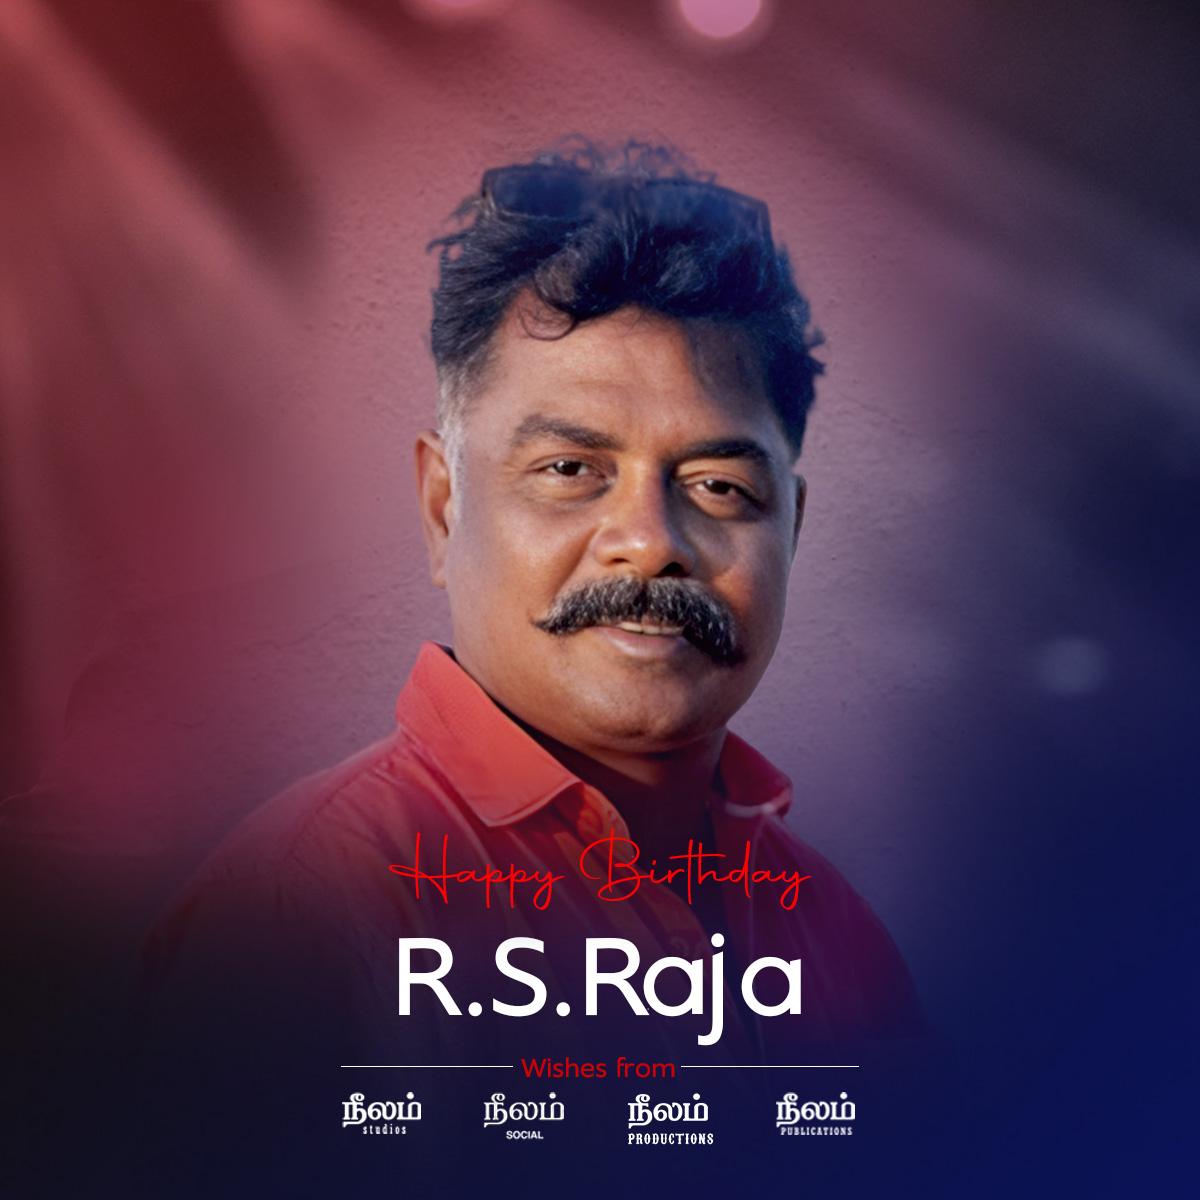 One of our own, the insanely talented and the man with an incredible eye for detail! Wishing you a wonderful birthday and a great year ahead @r_stills anna✨ #HappyBirthdayRSRaja #HBDRSRaja